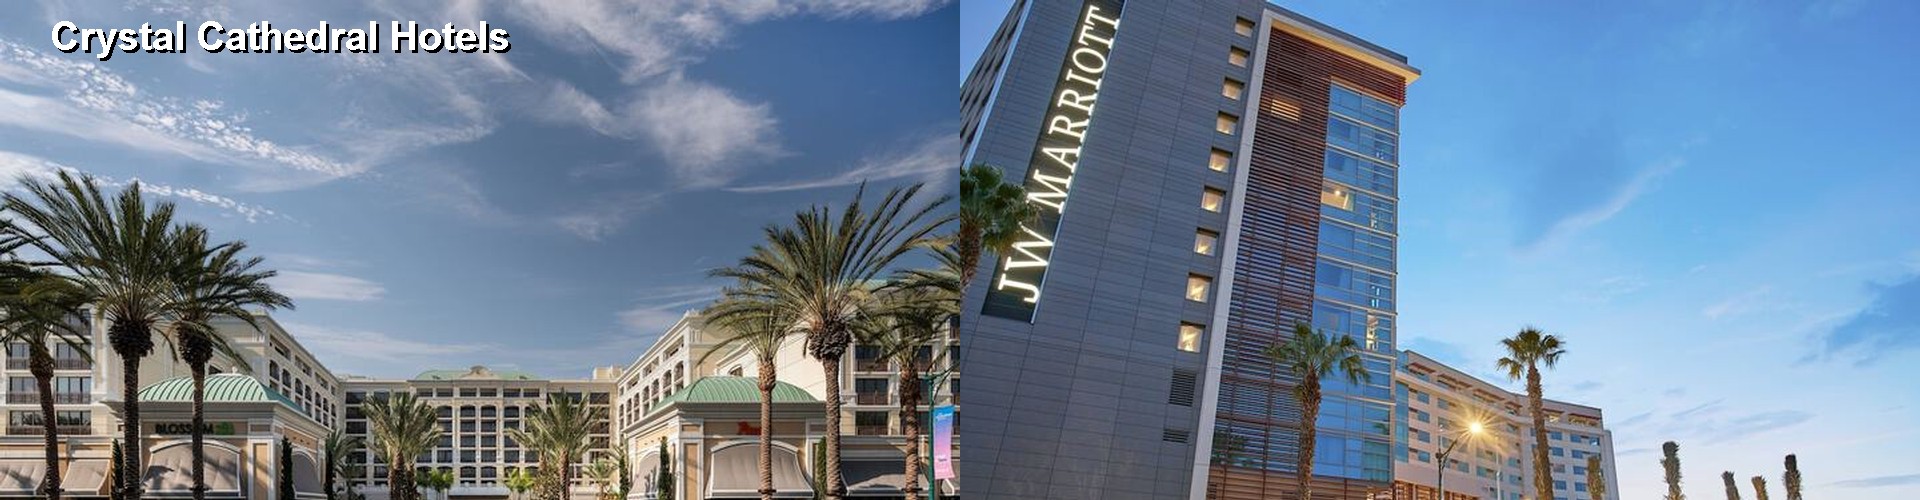 5 Best Hotels near Crystal Cathedral